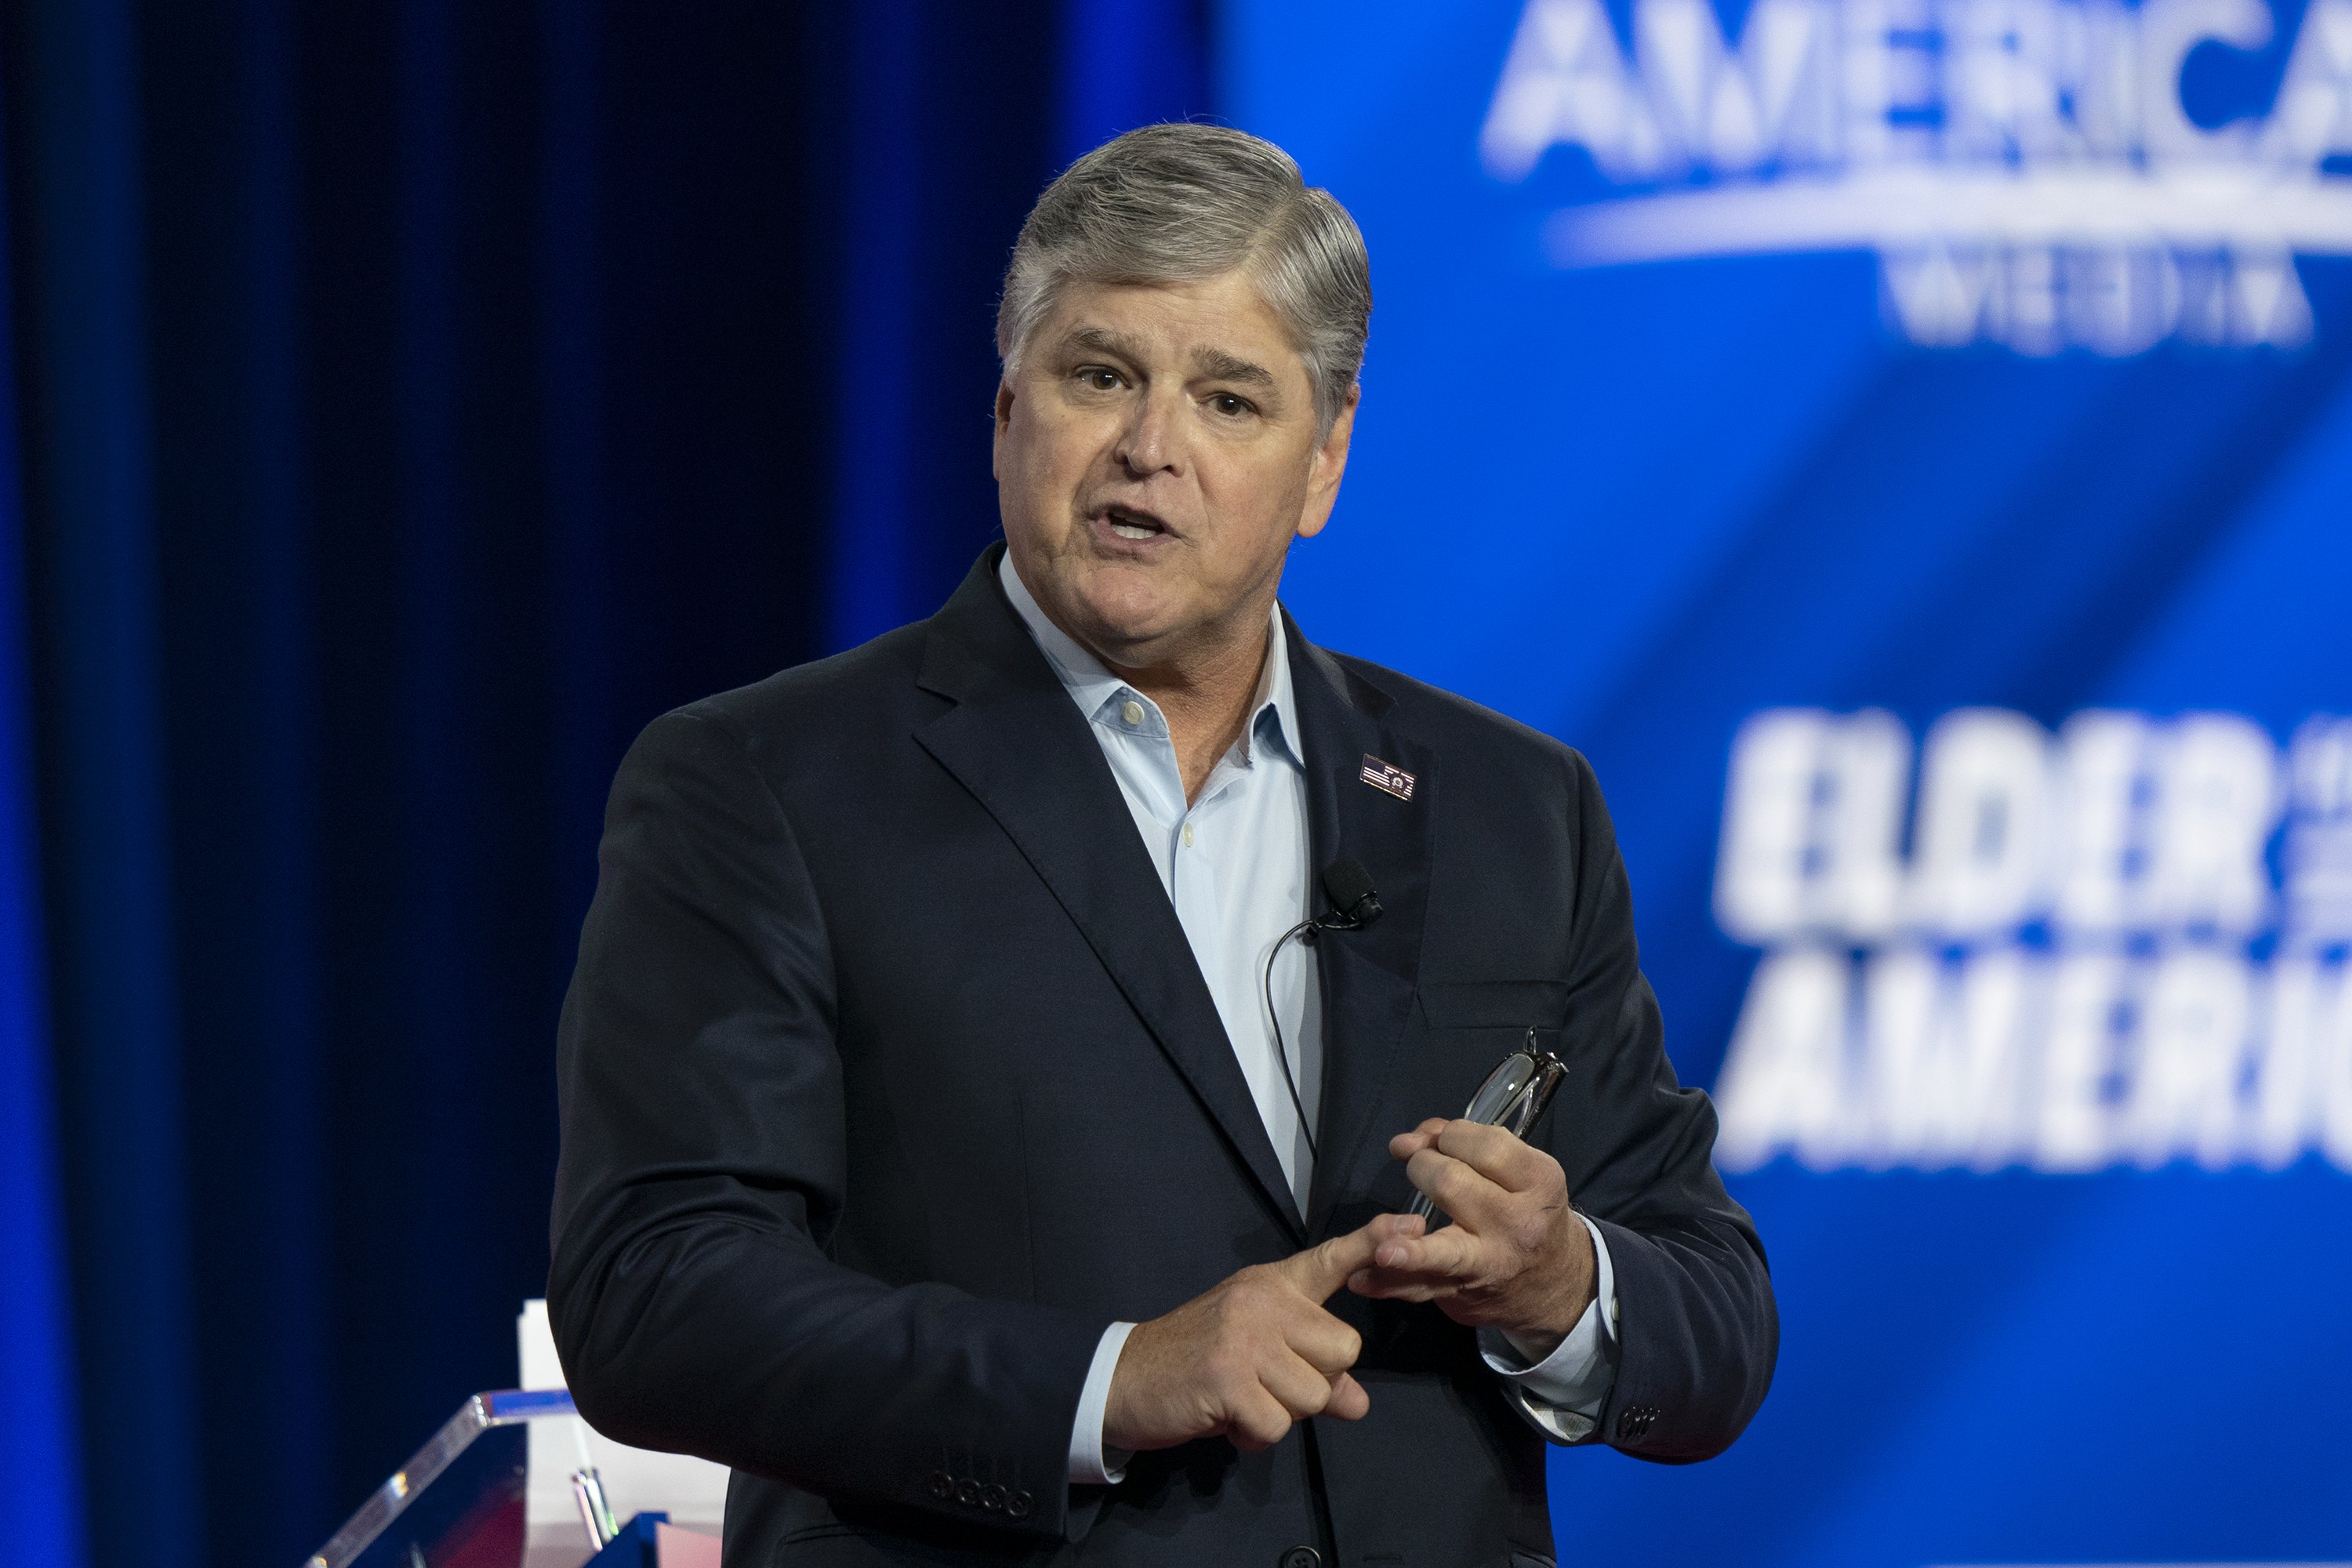 Sean Hannity speaks during CPAC (Conservative Political Action Conference) Texas 2022 conference at Hilton Anatole | Source: Getty Images